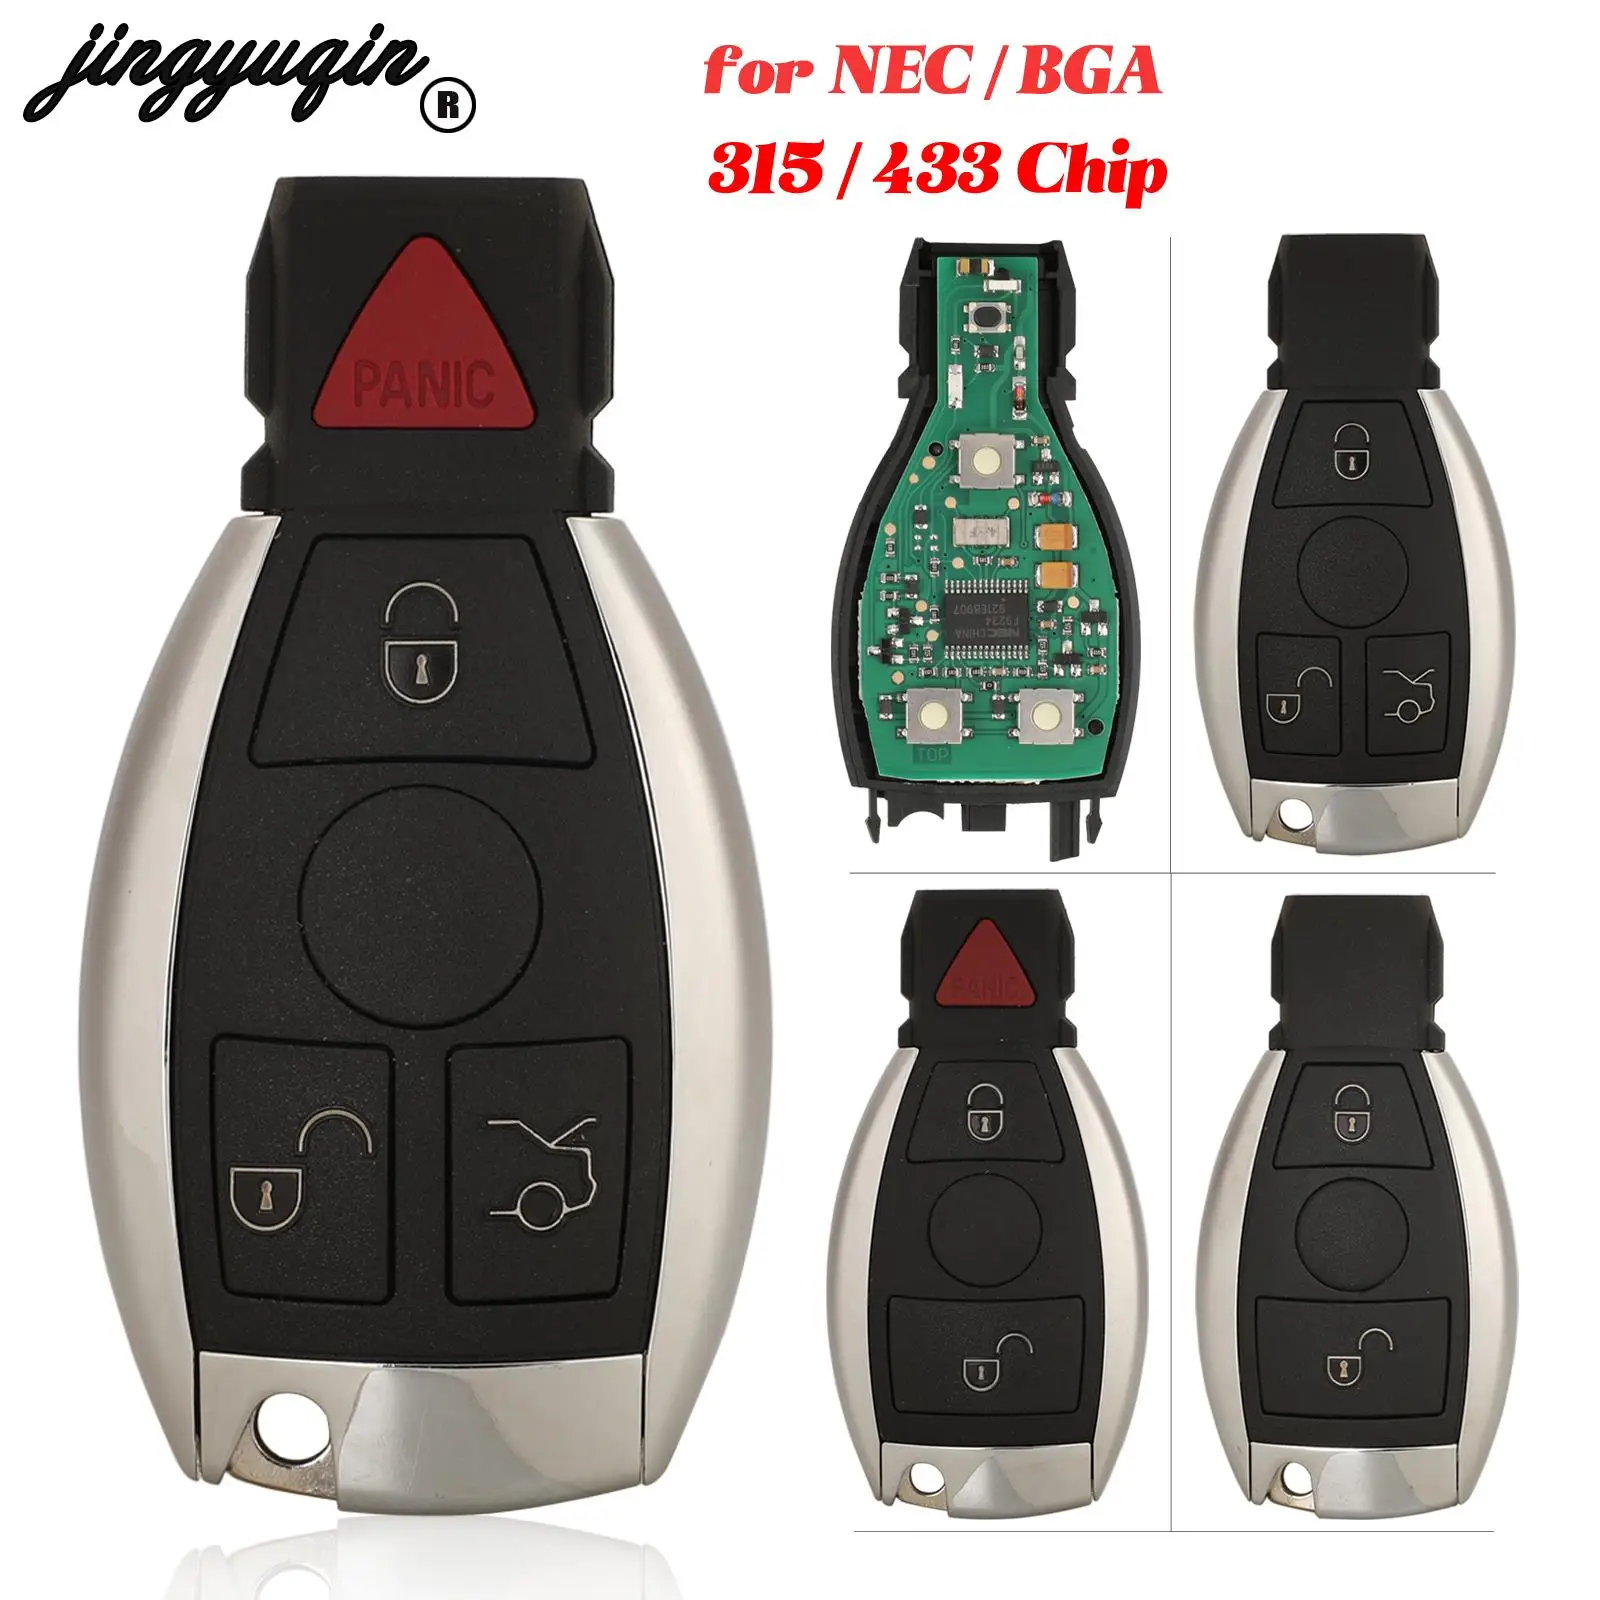 

jingyuqin 10pcs For Mercedes Benz Car Remote Controller Year 2000 - Remote key 315Mhz 434Mhz NEC and BGA and BE 2/3/4 Buttons